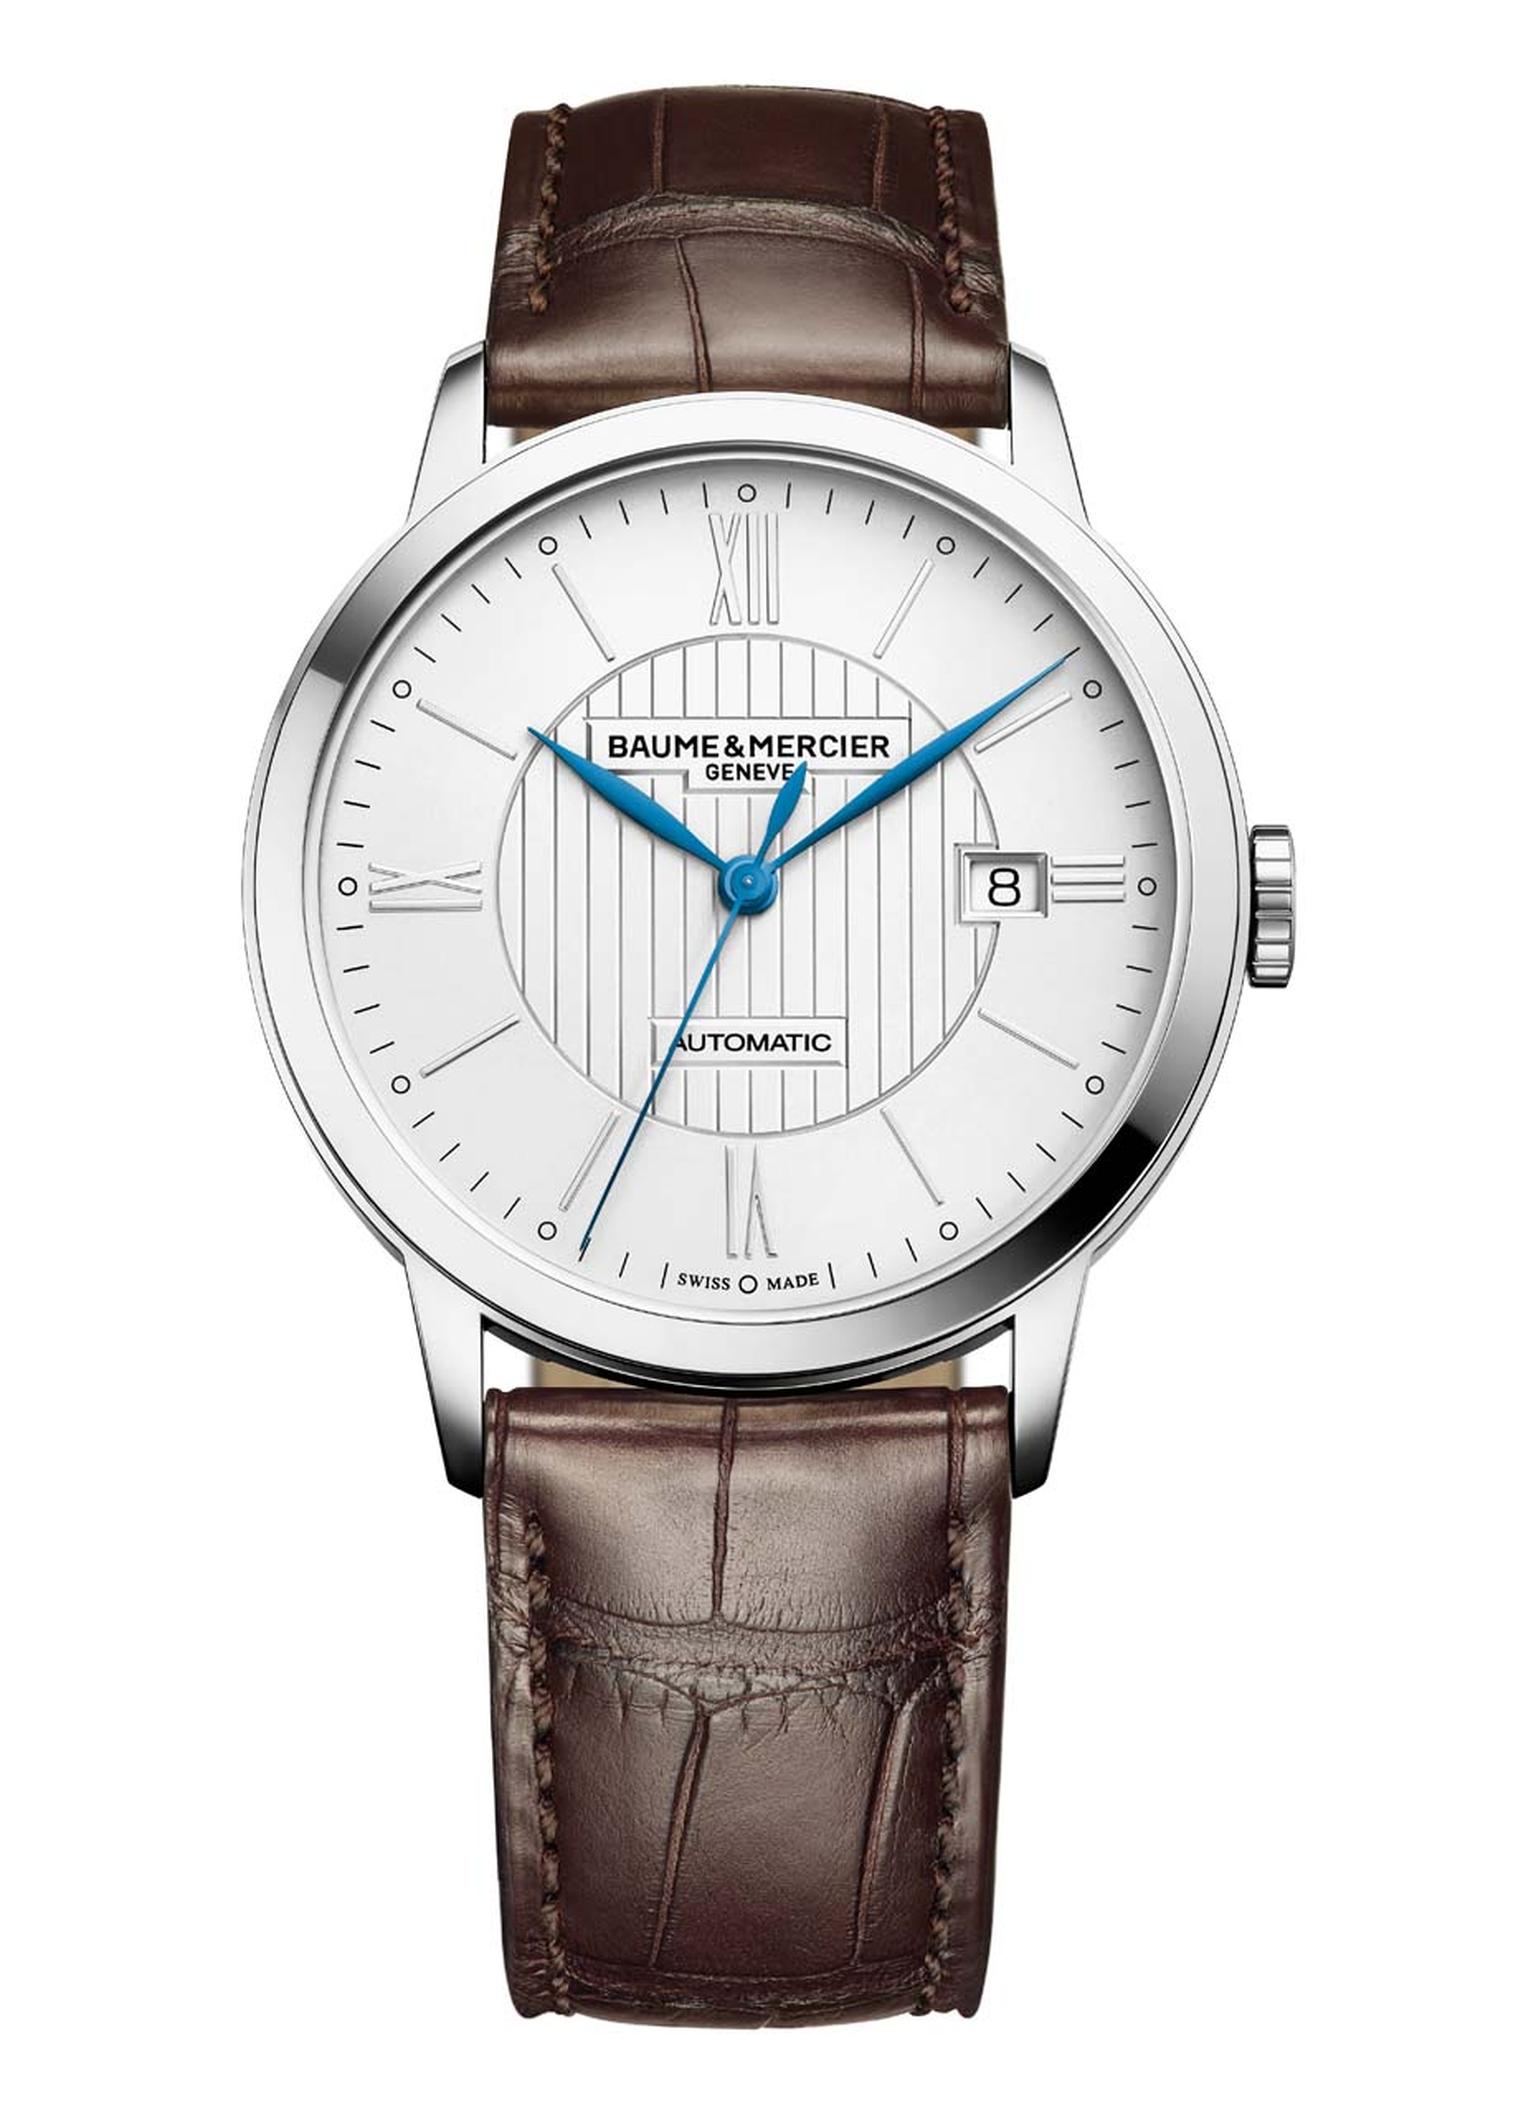 Baume & Mercier Classima watch is a handsome contender for a graduation gift. The 40mm stainless steel case frames the smart opaline dial with central guilloché decor, Roman numerals and indices, central hour, minute and seconds hands and a date window at